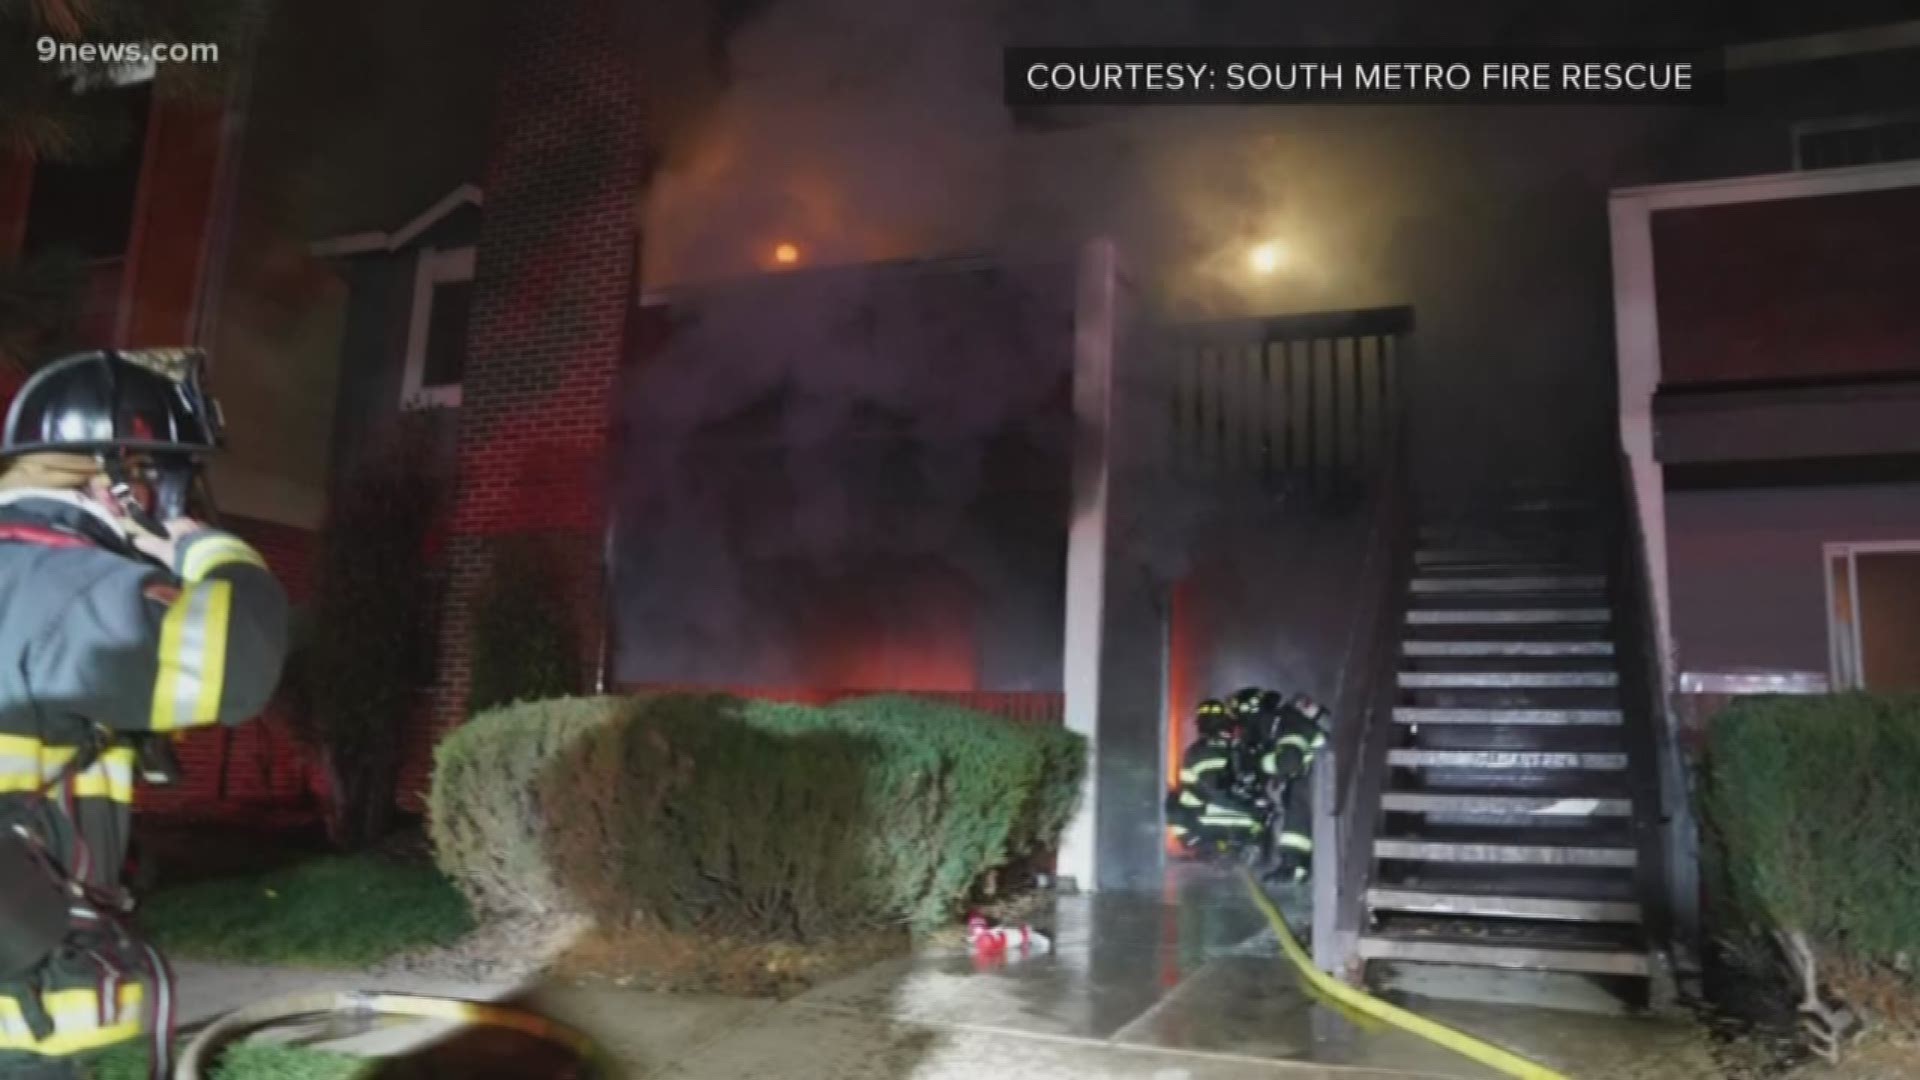 A woman has died after she was rescued from an apartment fire in Littleton Wednesday morning.